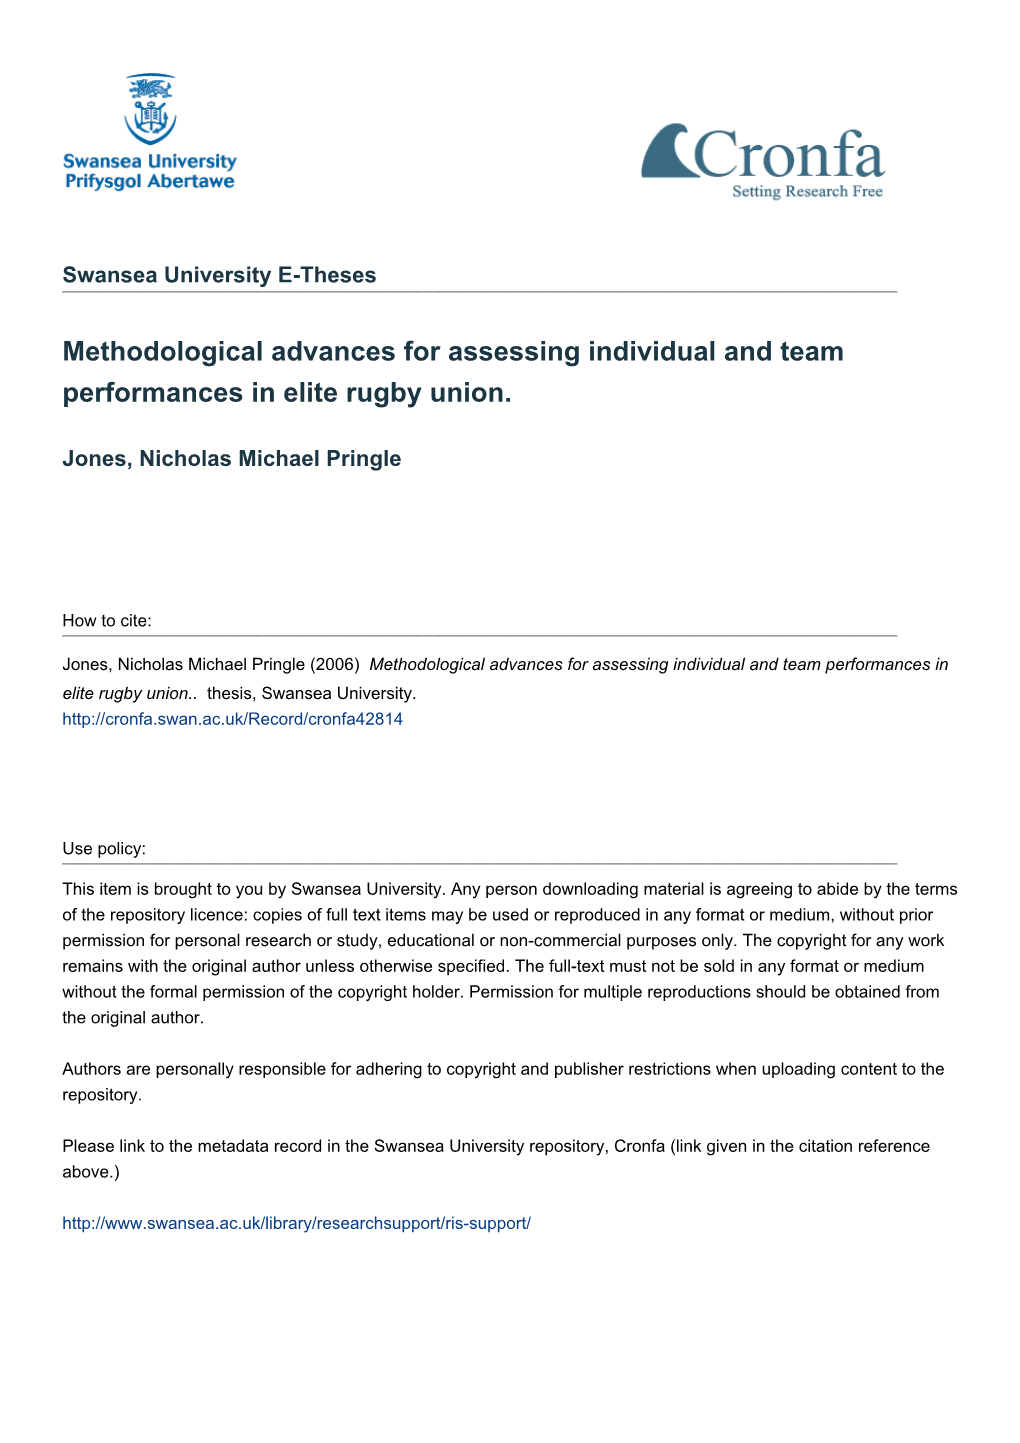 Methodological Advances for Assessing Individual and Team Performances in Elite Rugby Union